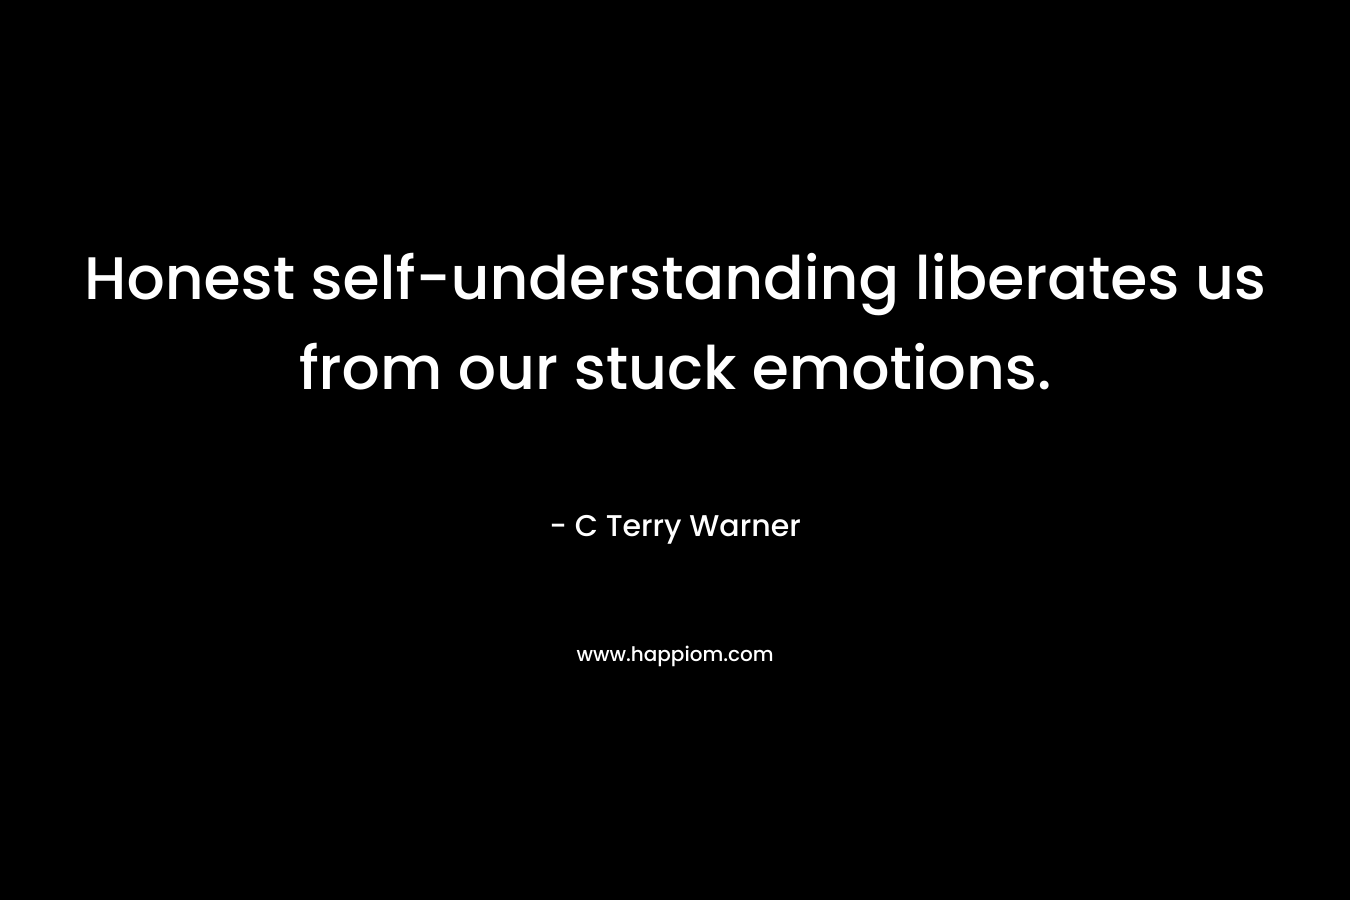 Honest self-understanding liberates us from our stuck emotions.